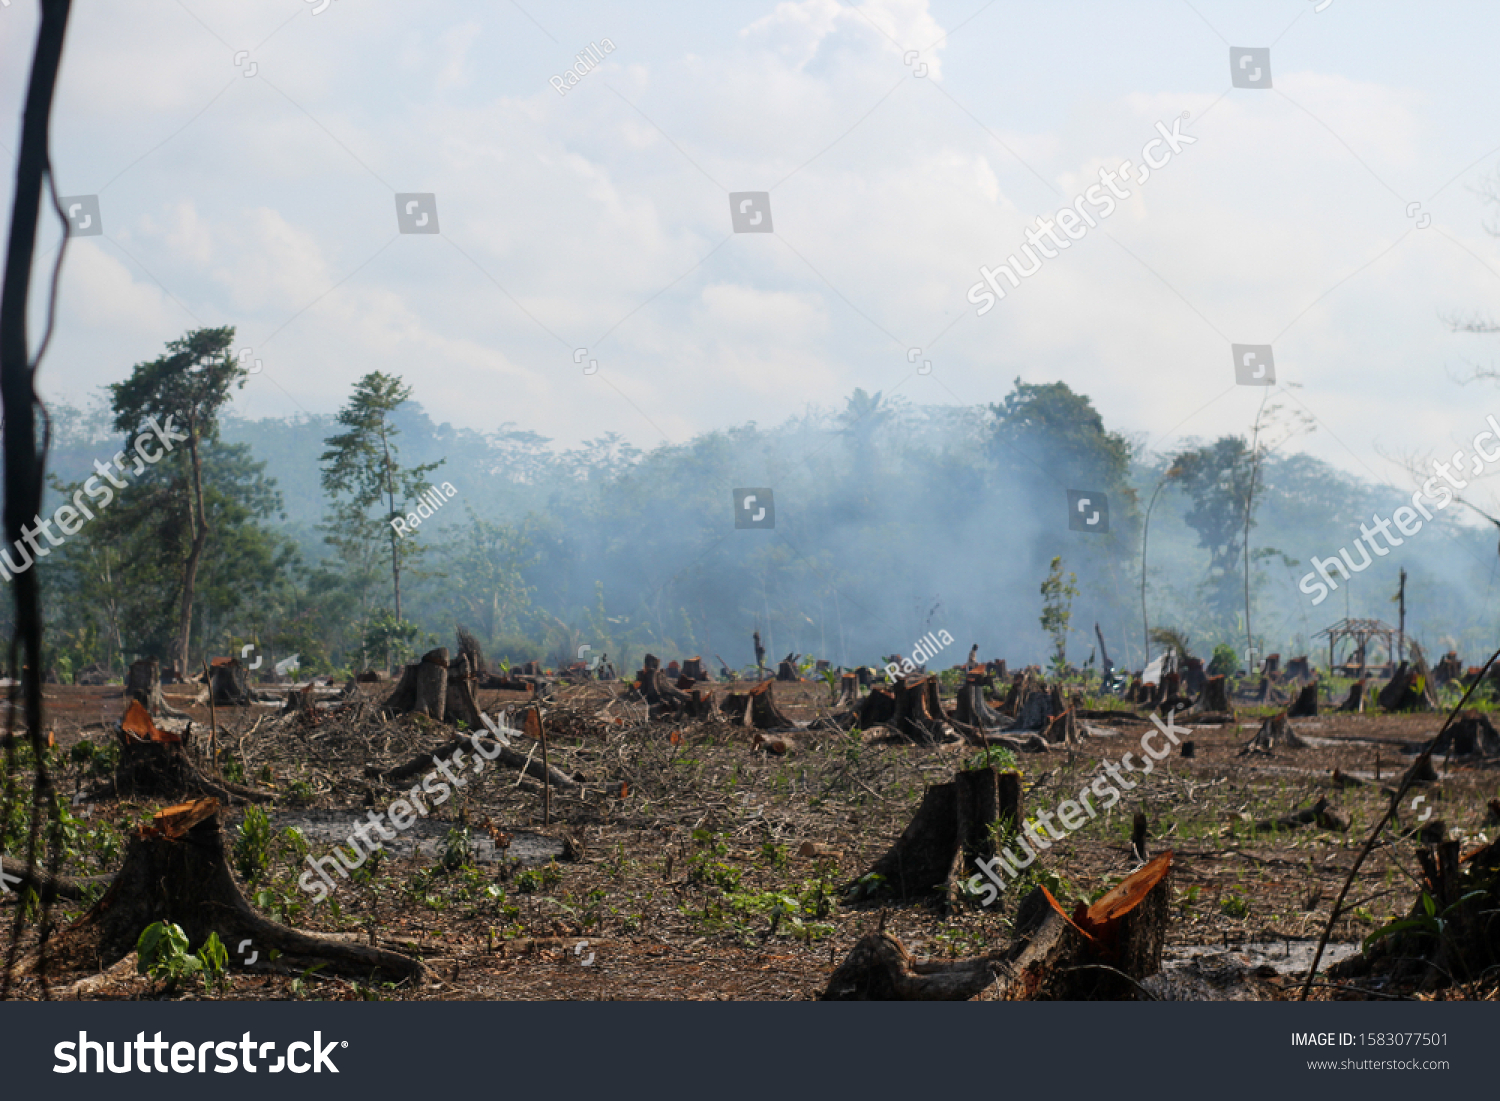 Commercial
Editorial
The extent of illegal logging in the forest so that the negative impact is higher for the surrounding environment #1583077501